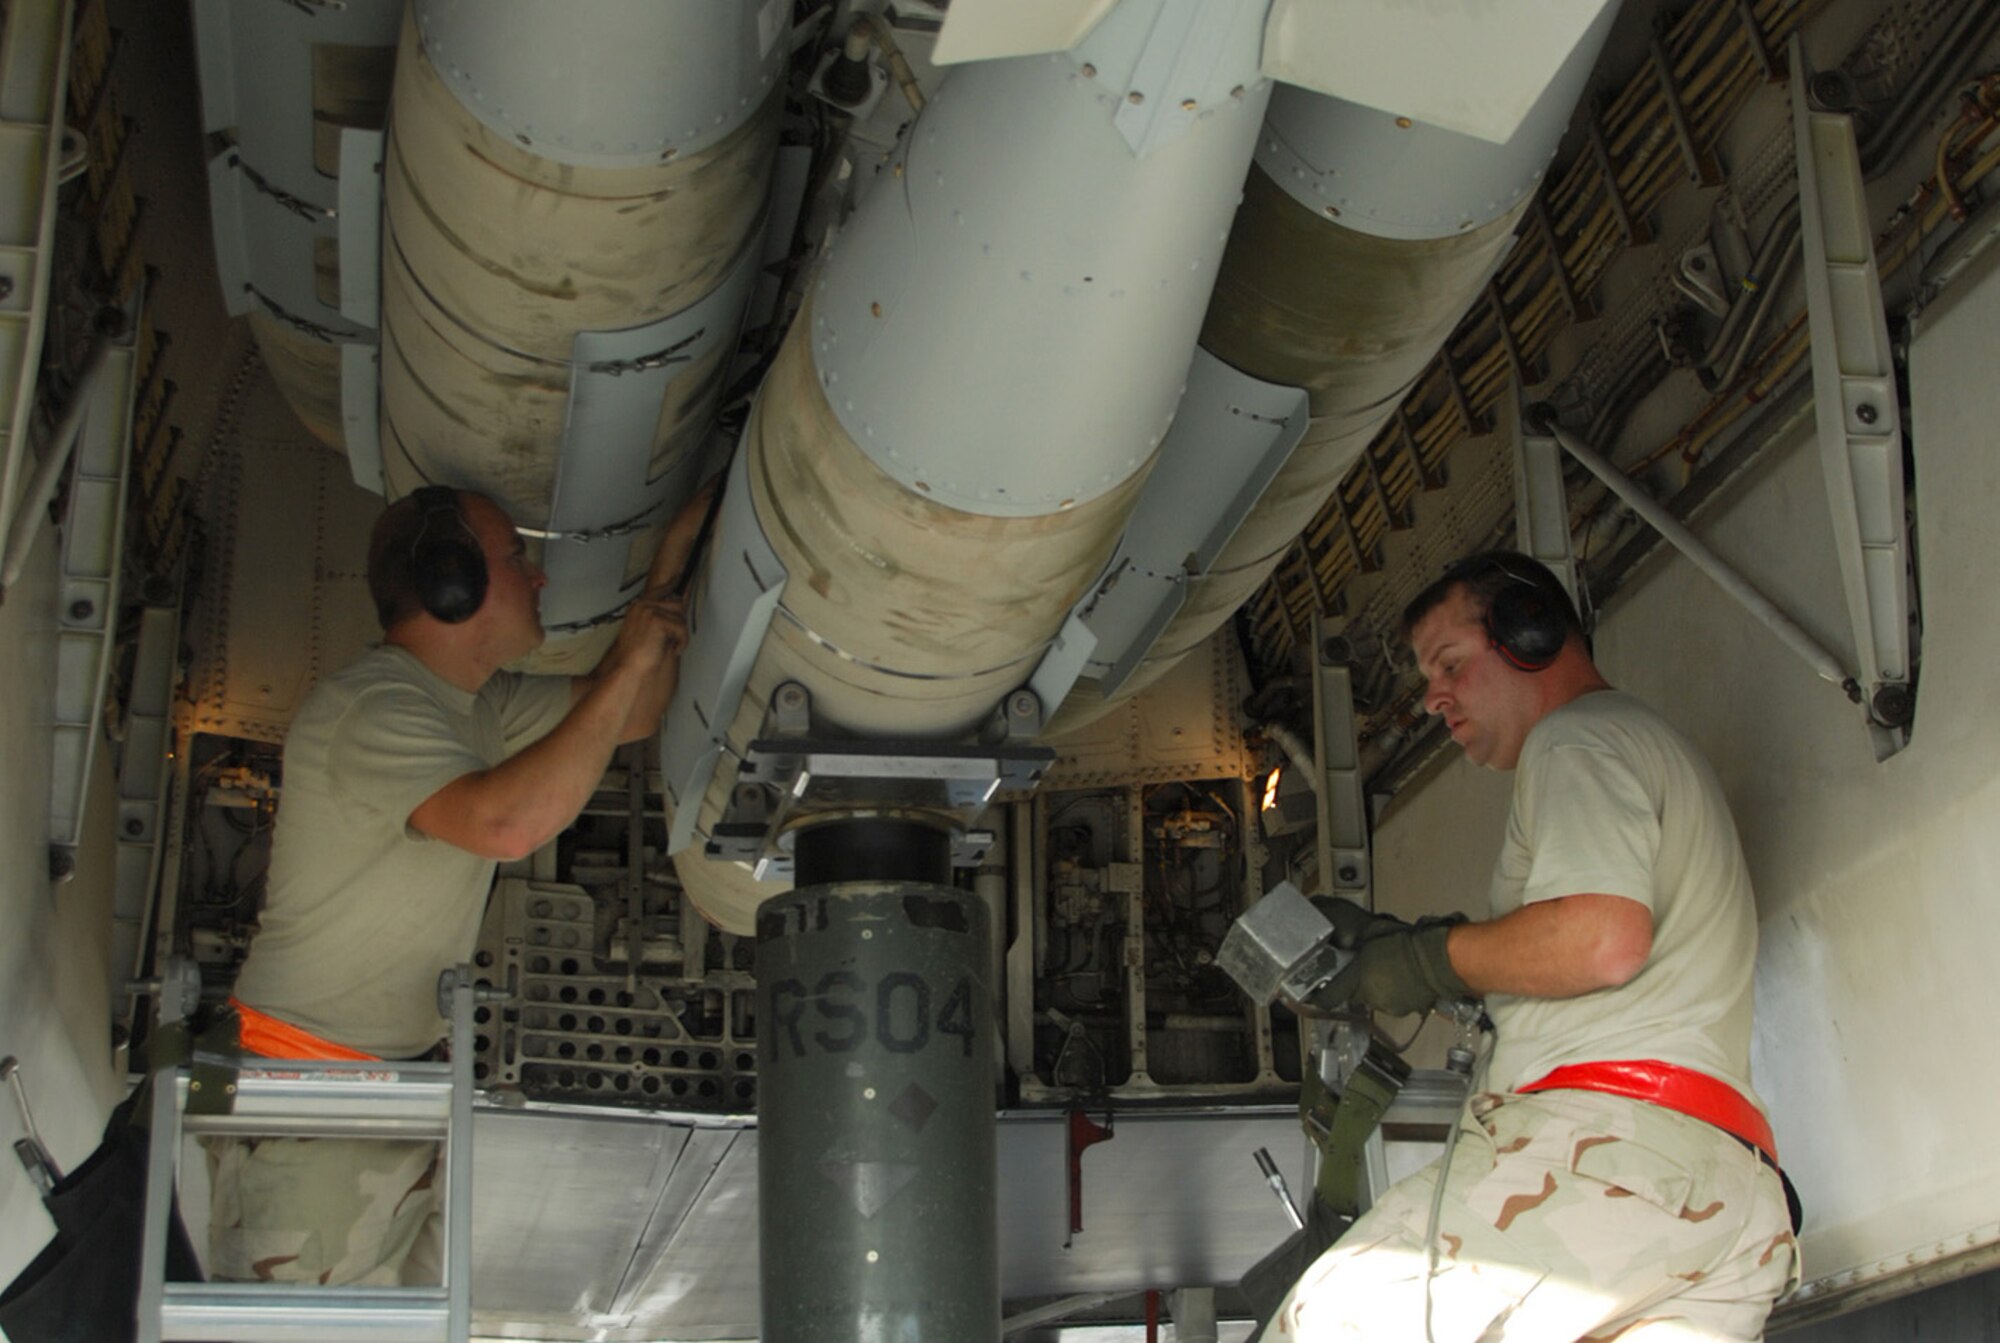 SOUTHWEST ASIA - Staff Sgt. Brandon Neitz (left) and Tech. Sgt. James Sheldon, 379th Expeditionary Maintenance Squadron, load 2,000 pound bombs on a B-1B Lancer Dec. 21 to prepare it for a mission at a Southwest Asia air base. Both sergeants are deployed from Dyess Air Force Base, Texas. (U.S. Air Force photo/Staff Sgt. Douglas Olsen)